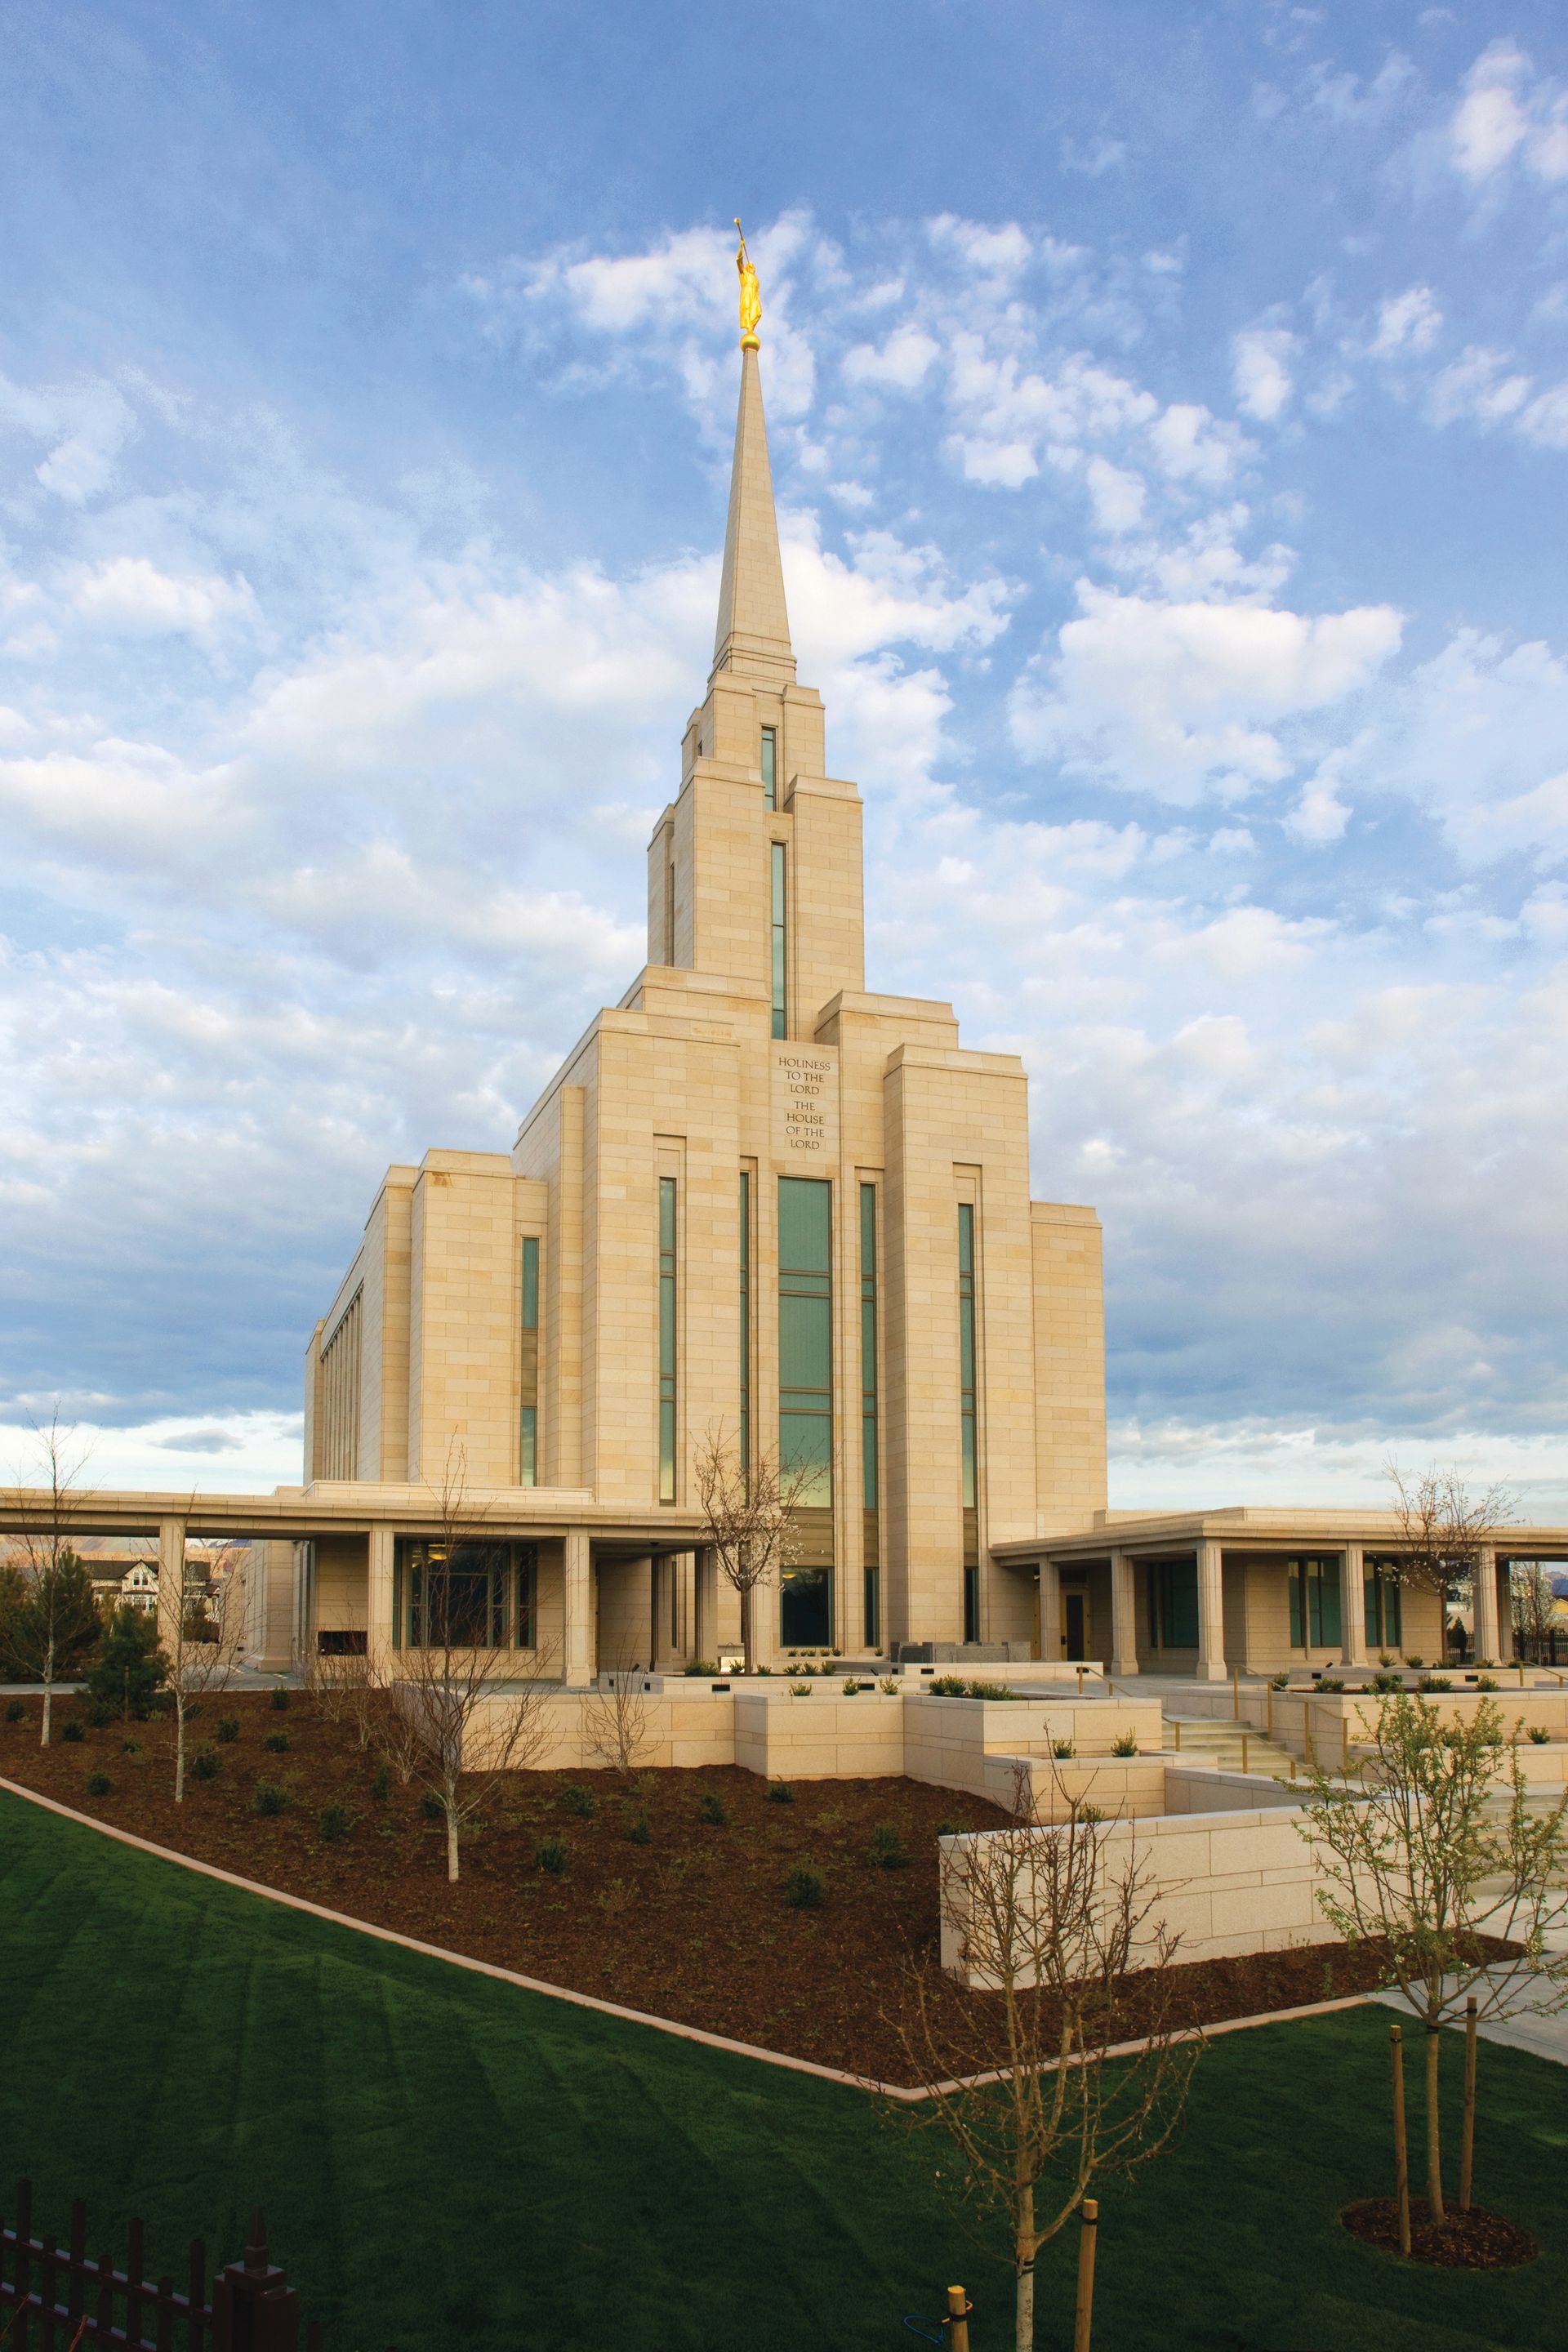 The Oquirrh Mountain Utah Temple and grounds.